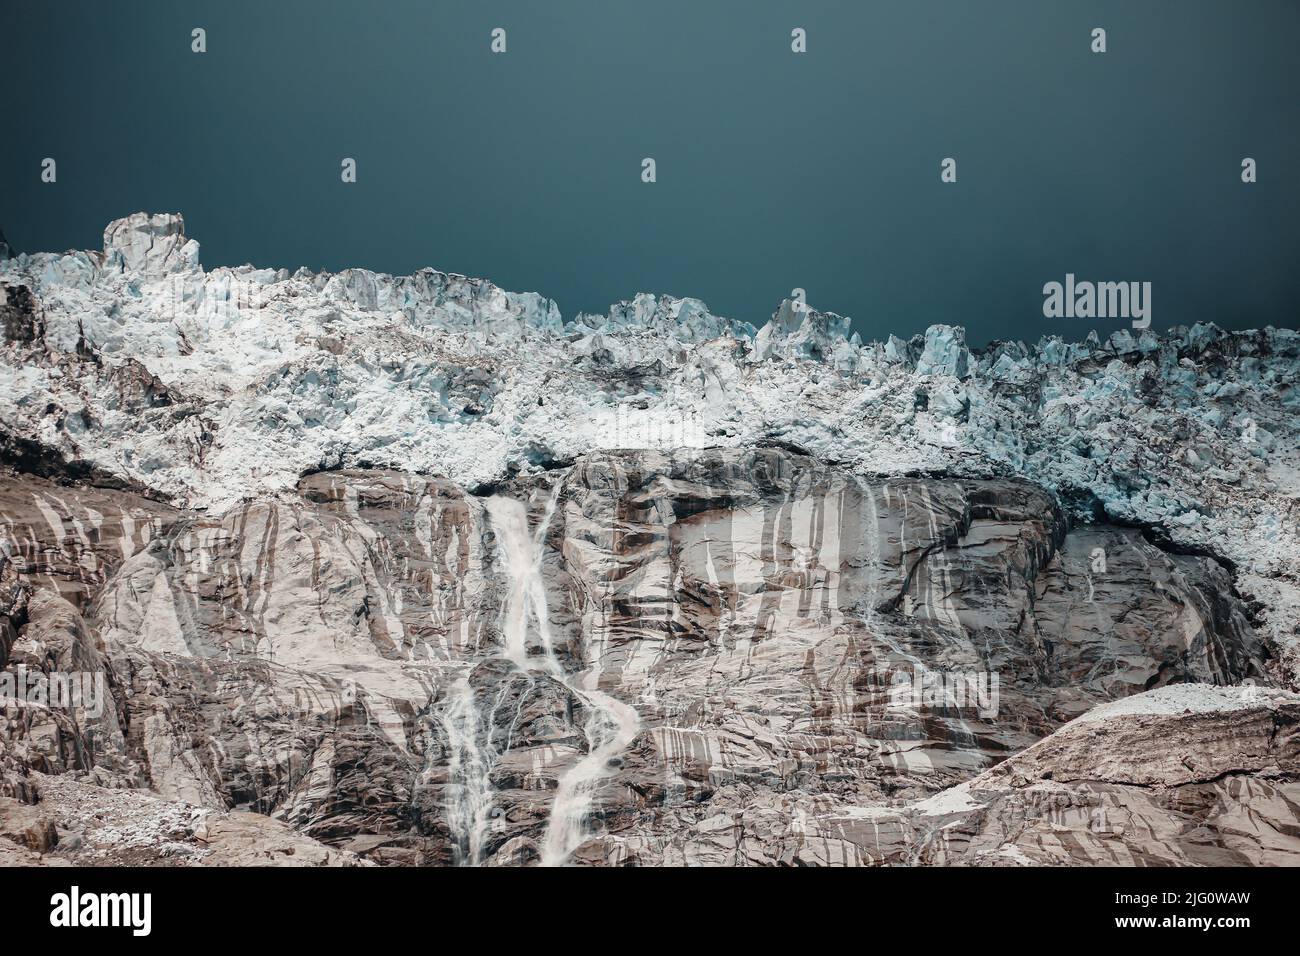 Risk of collapse from the Planpincieux glacier on the Italian side of the Mont Blanc massif Stock Photo